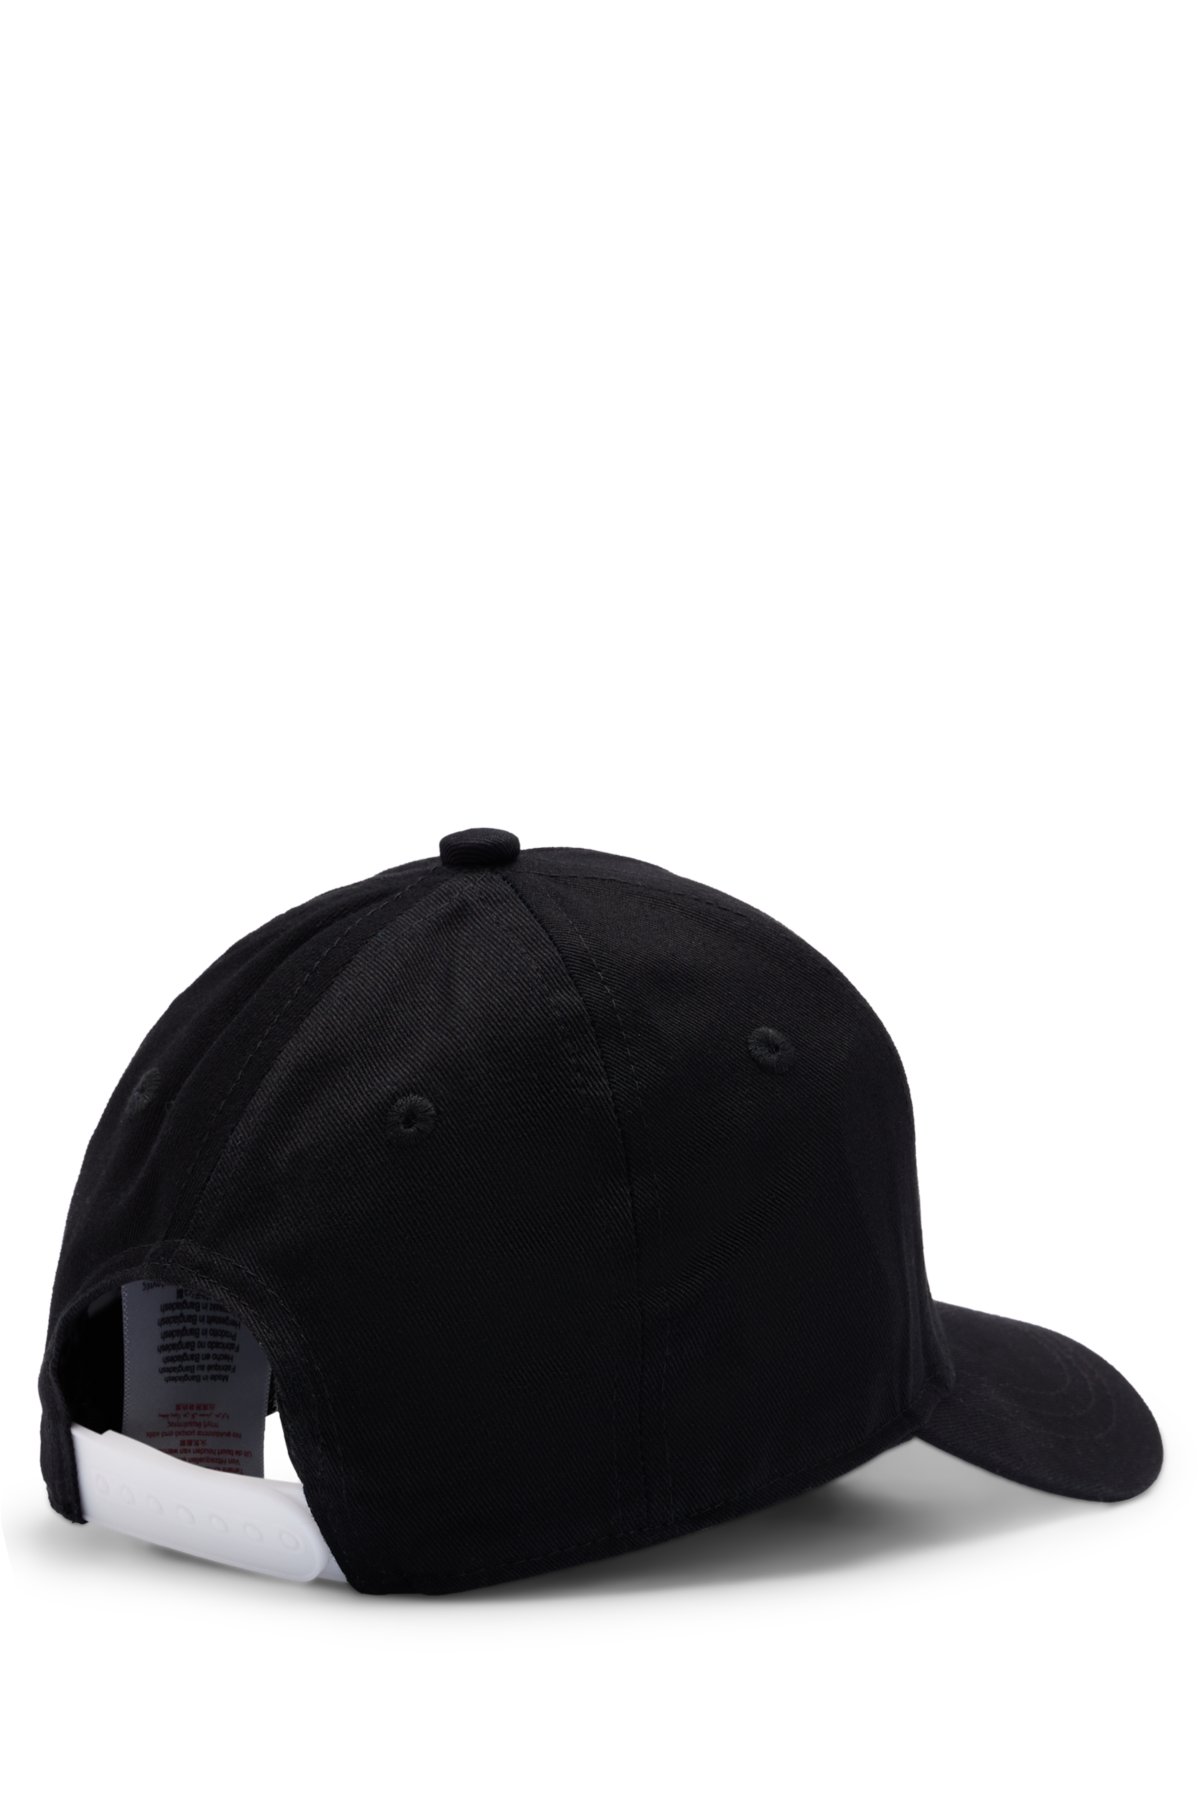 Kids' cap in cotton twill with logo print, Black